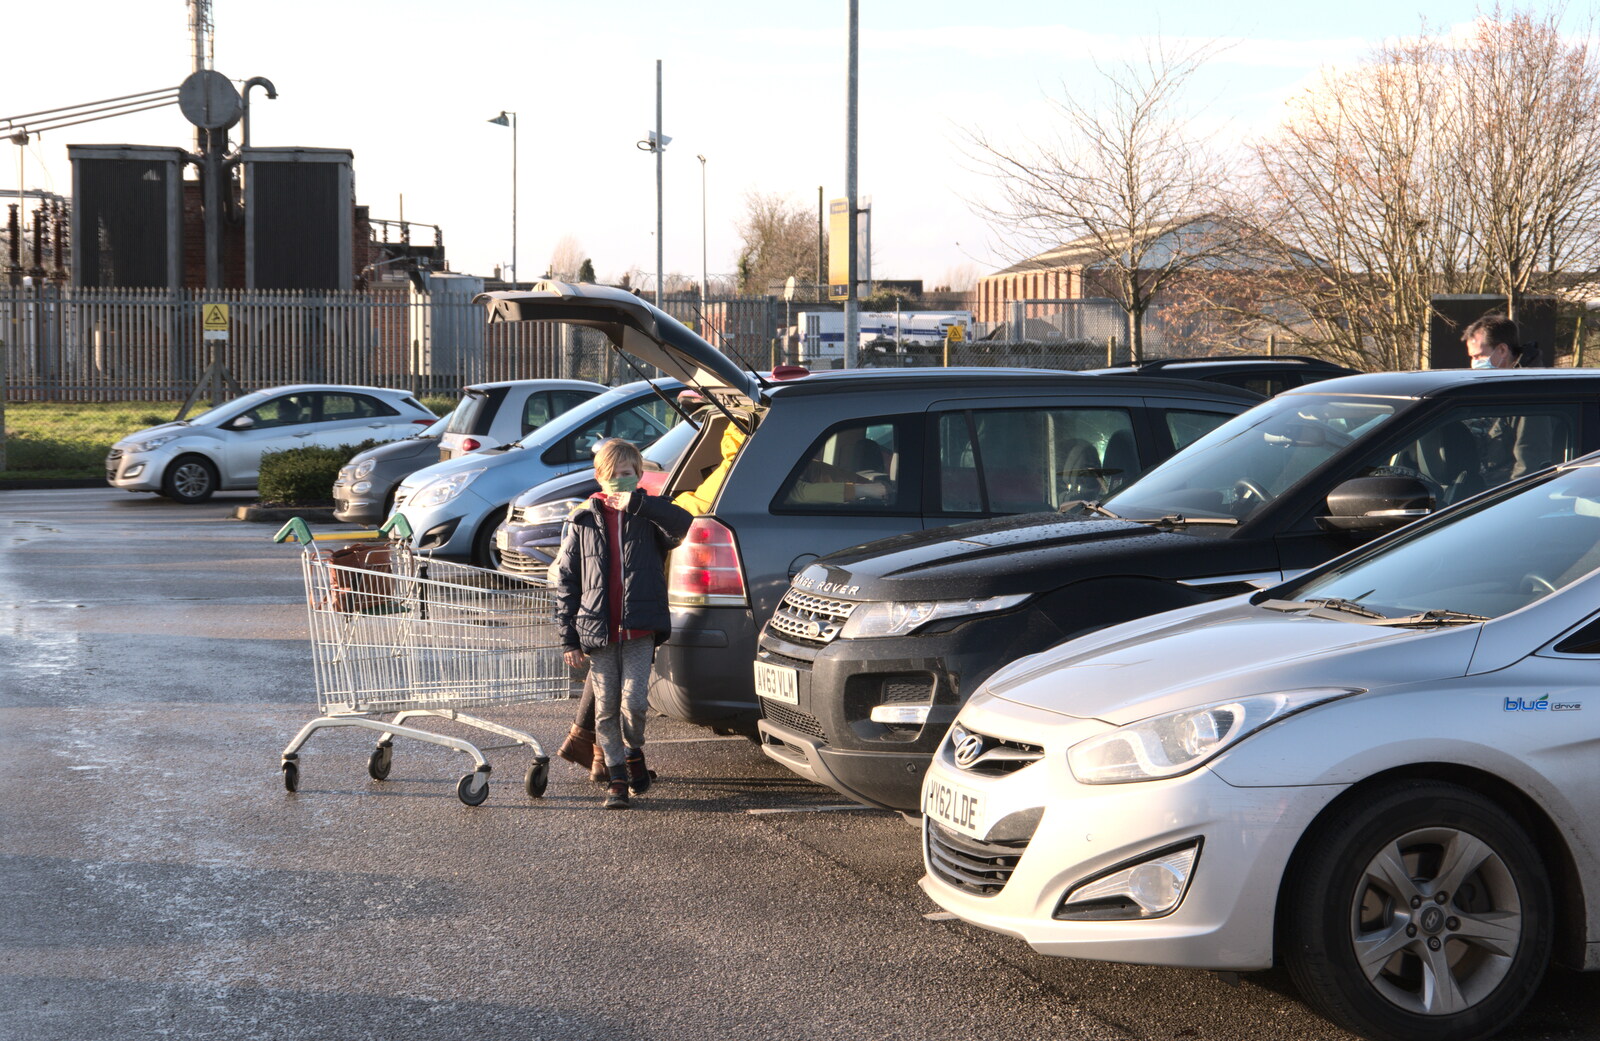 Harry waits by the car in Morrisons from Joe Wicks and Diss on Saturday, Norfolk - 19th December 2020